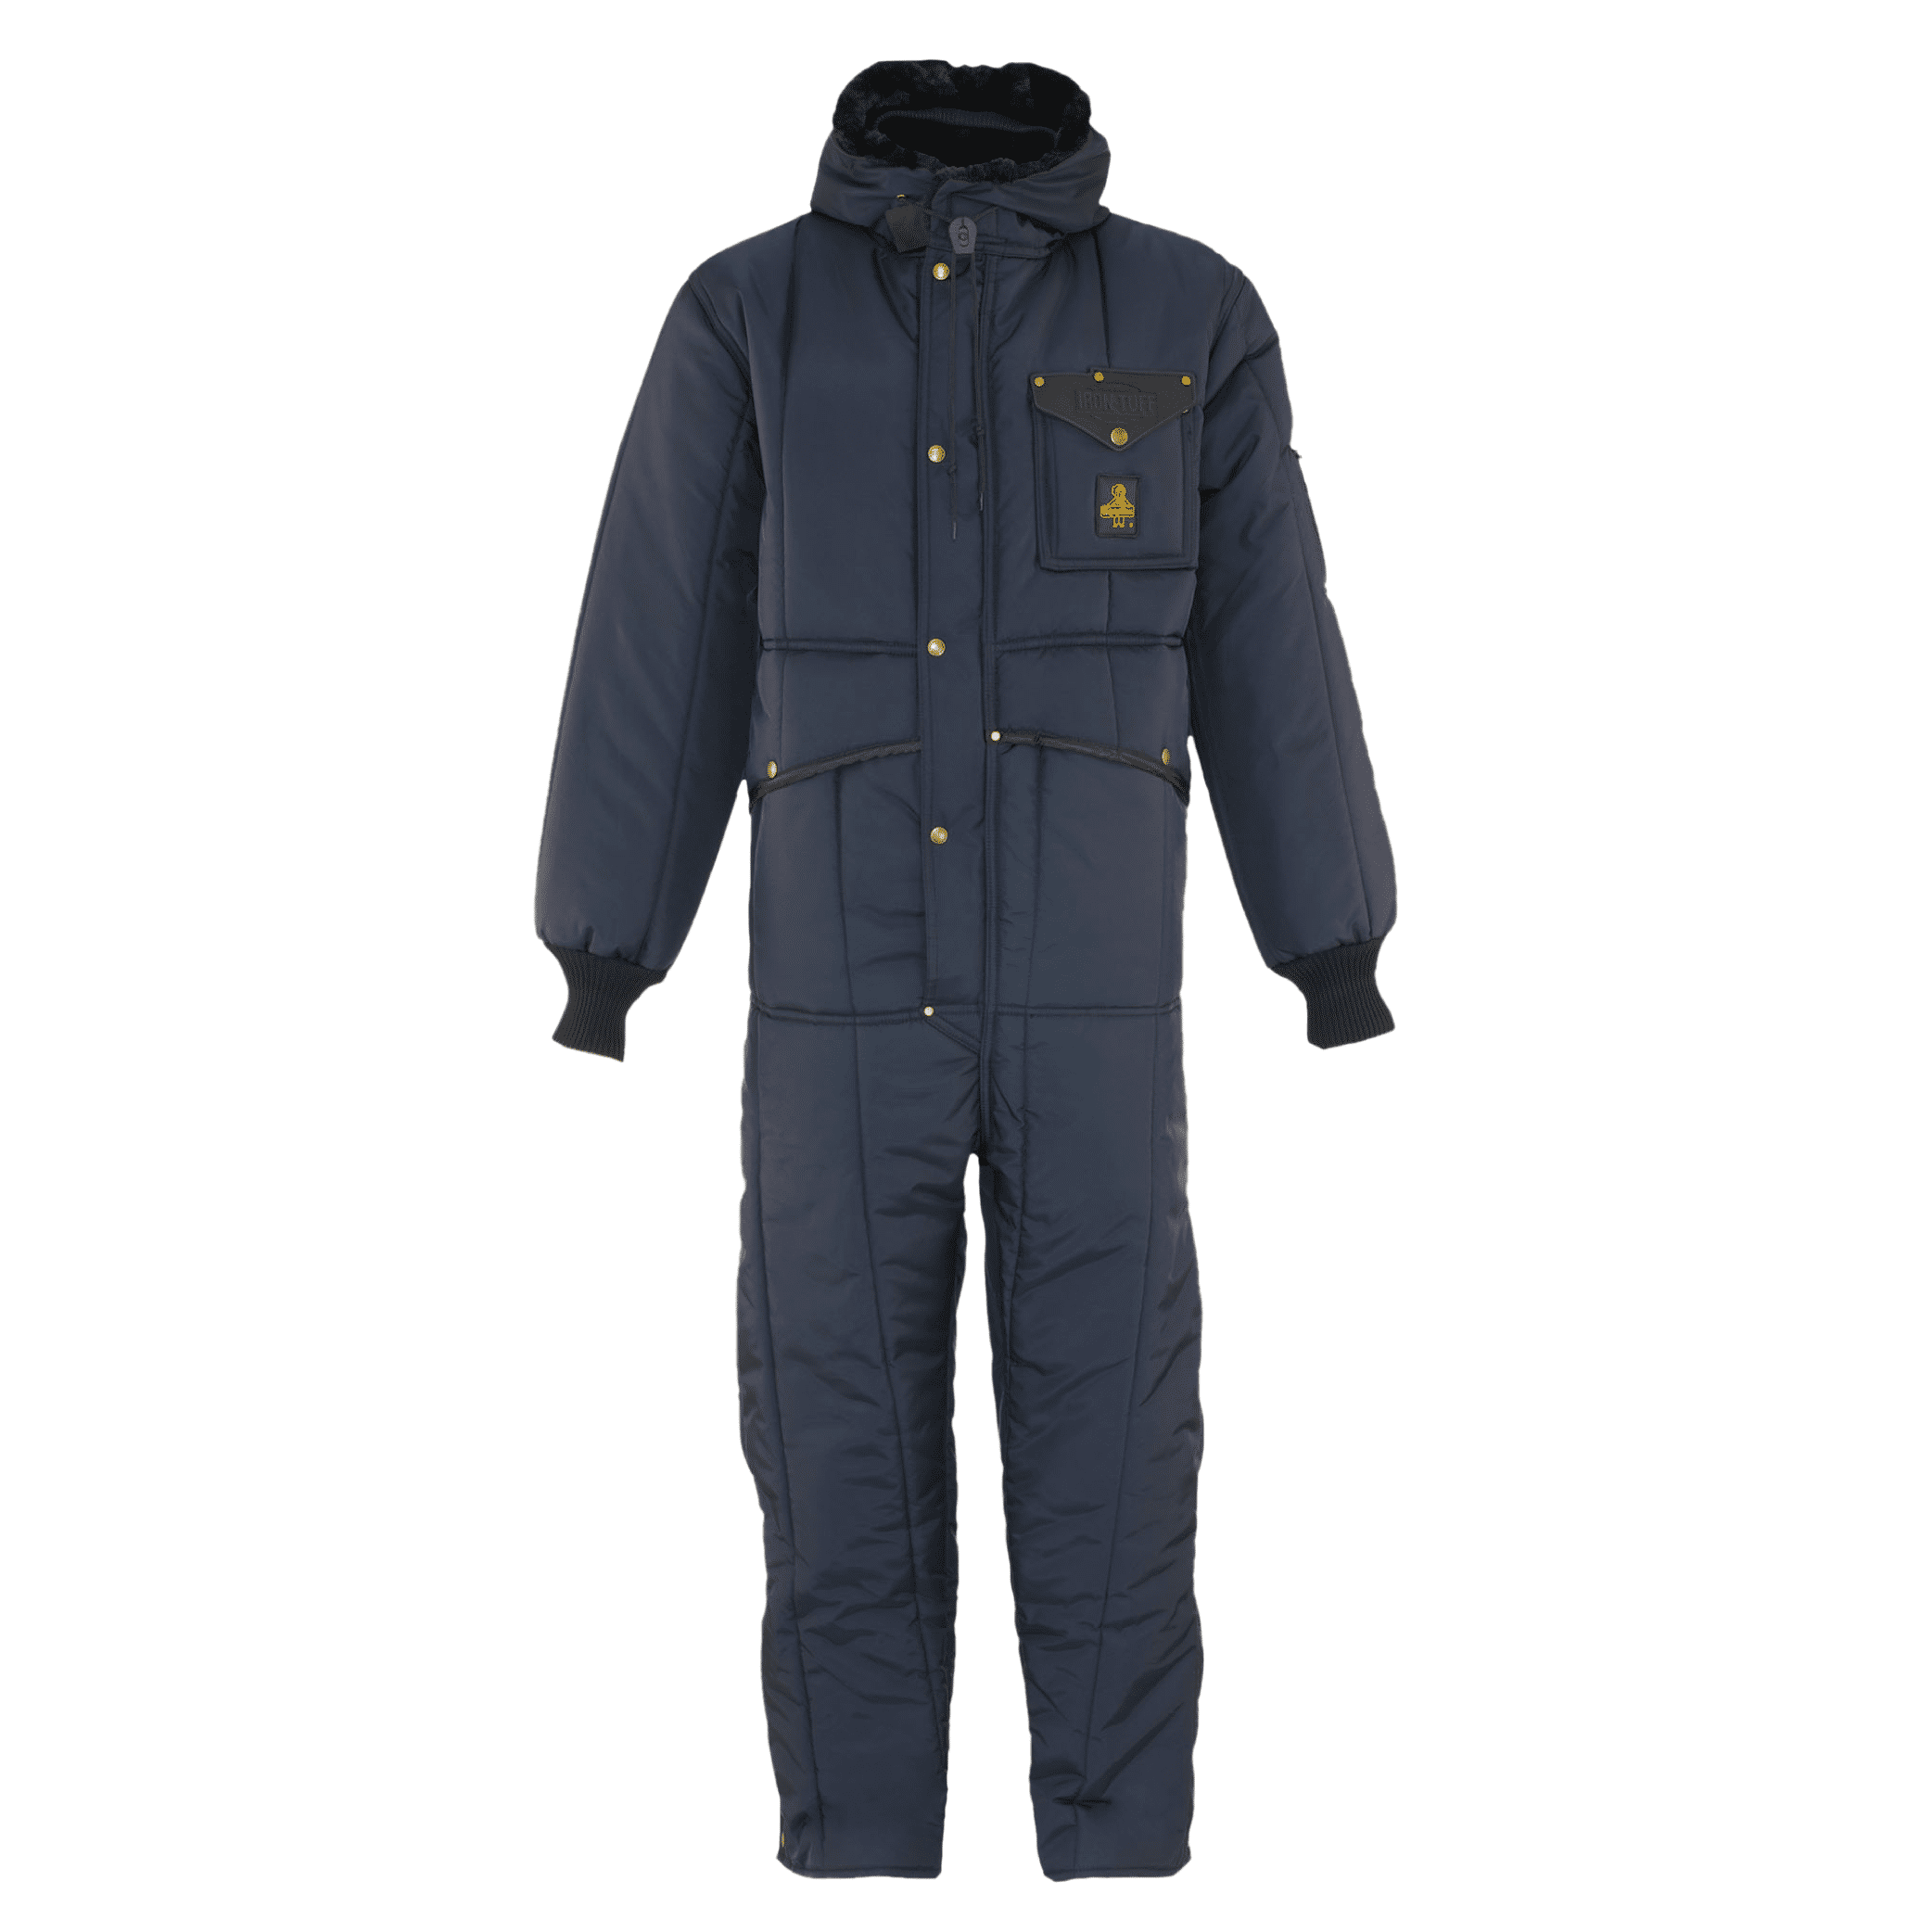 RefrigiWear Men's Iron-Tuff Insulated Coveralls with Hood -50F Cold  Protection (Navy, Medium)